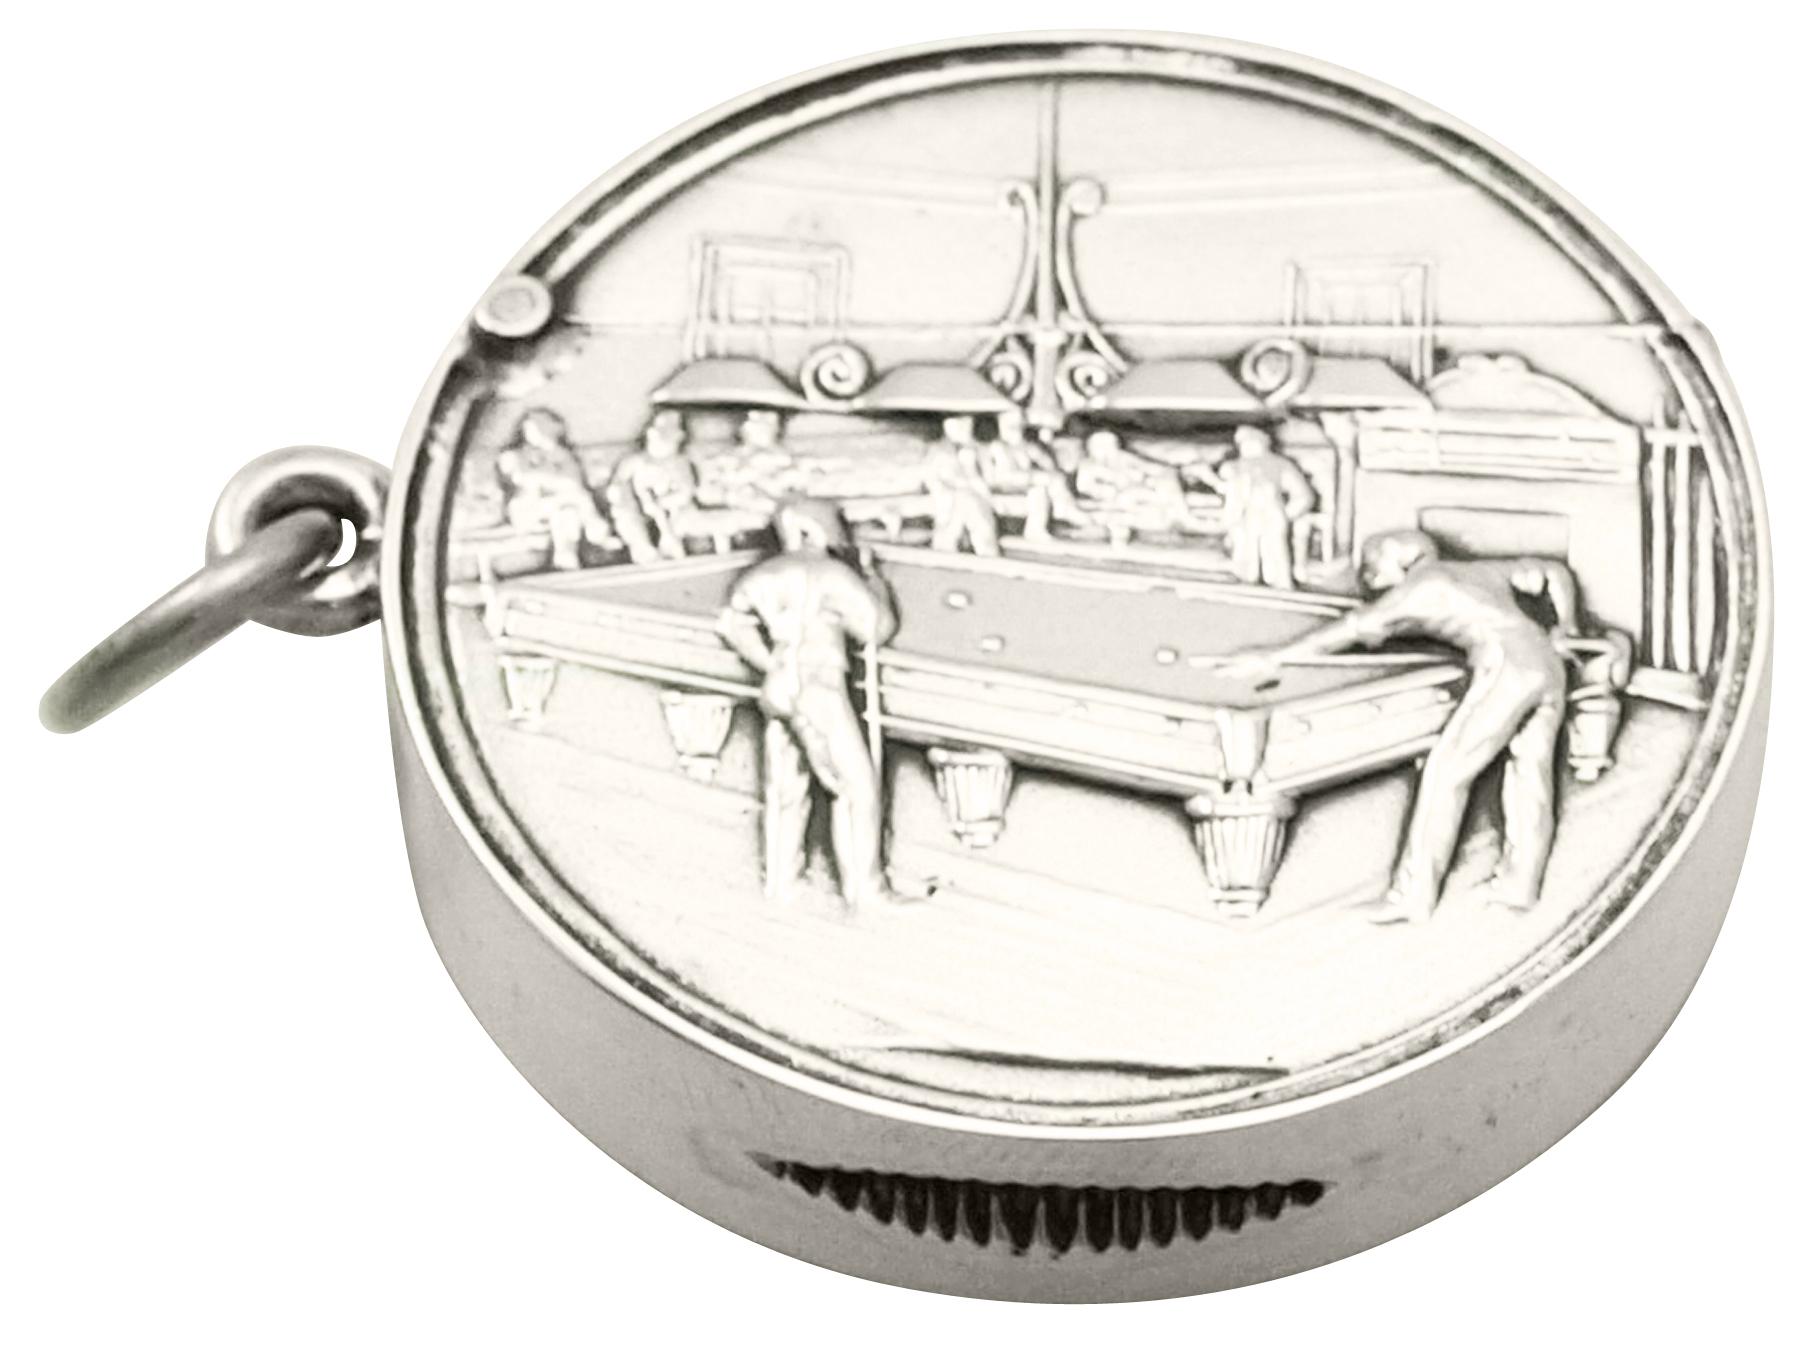 A fine and collectable antique Edwardian English sterling silver vesta case with billiard interest, an addition to our sports related silverware collection.

This fine Edwardian sterling silver vesta case has a plain circular form.

The anterior